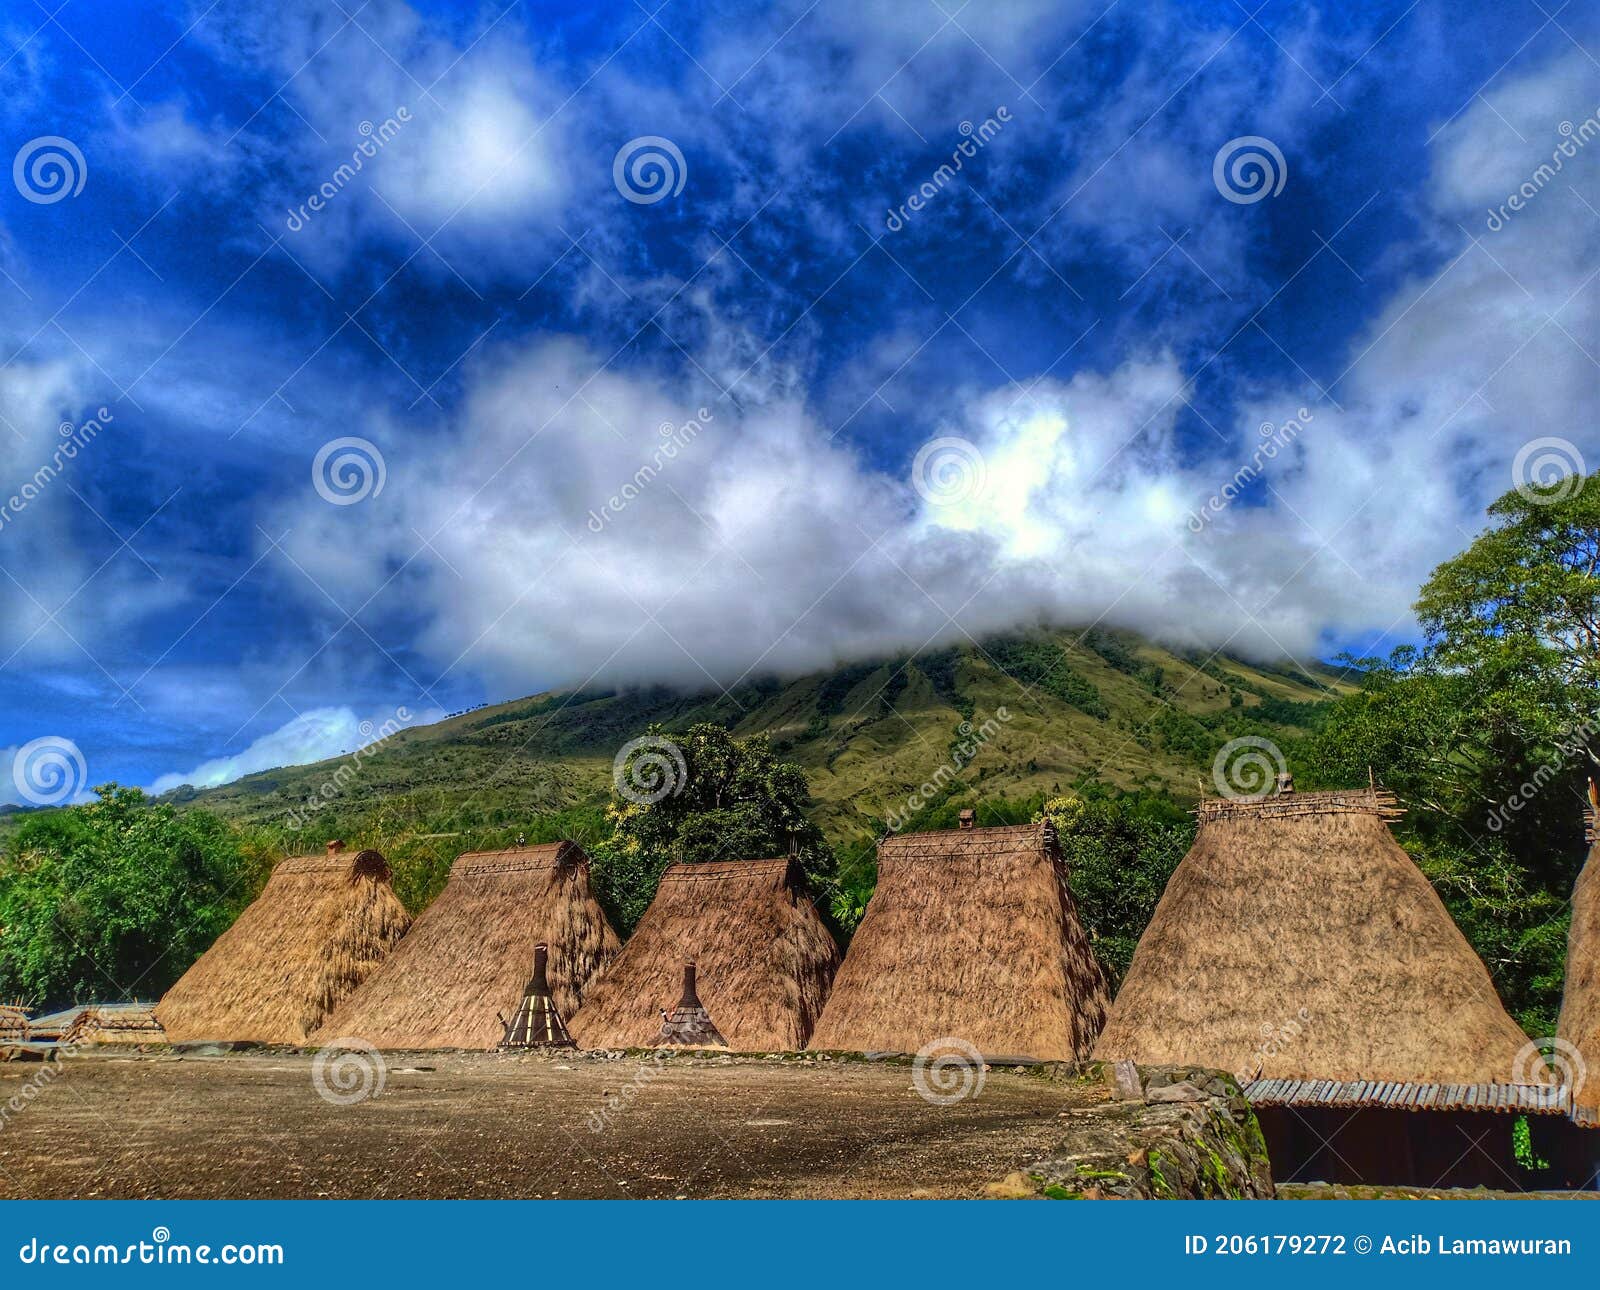 the roof of a house in the adat bena village on the island of flores, indonesia.